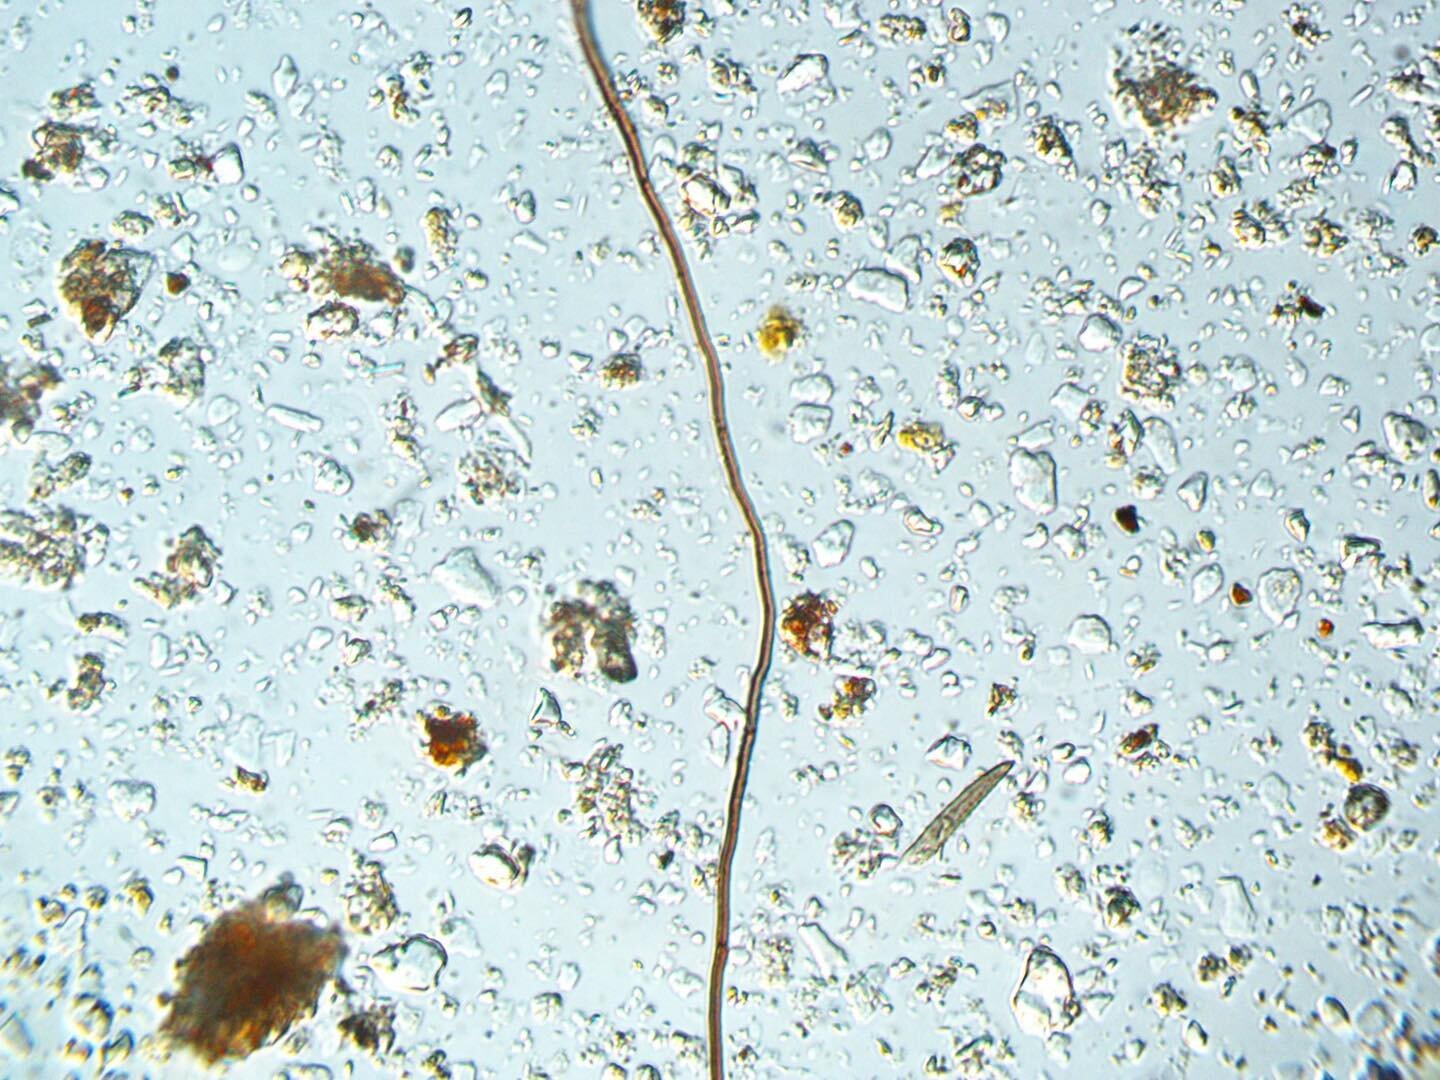 Photograph of fungal hypha sampled at our ongoing CSBI planting project. Fungal hyphae live within soil. They are microscopic tubelike shoots of fungi that form the mycelium network that exist in healthy soil. Fungal hyphae, like the one pictured abo